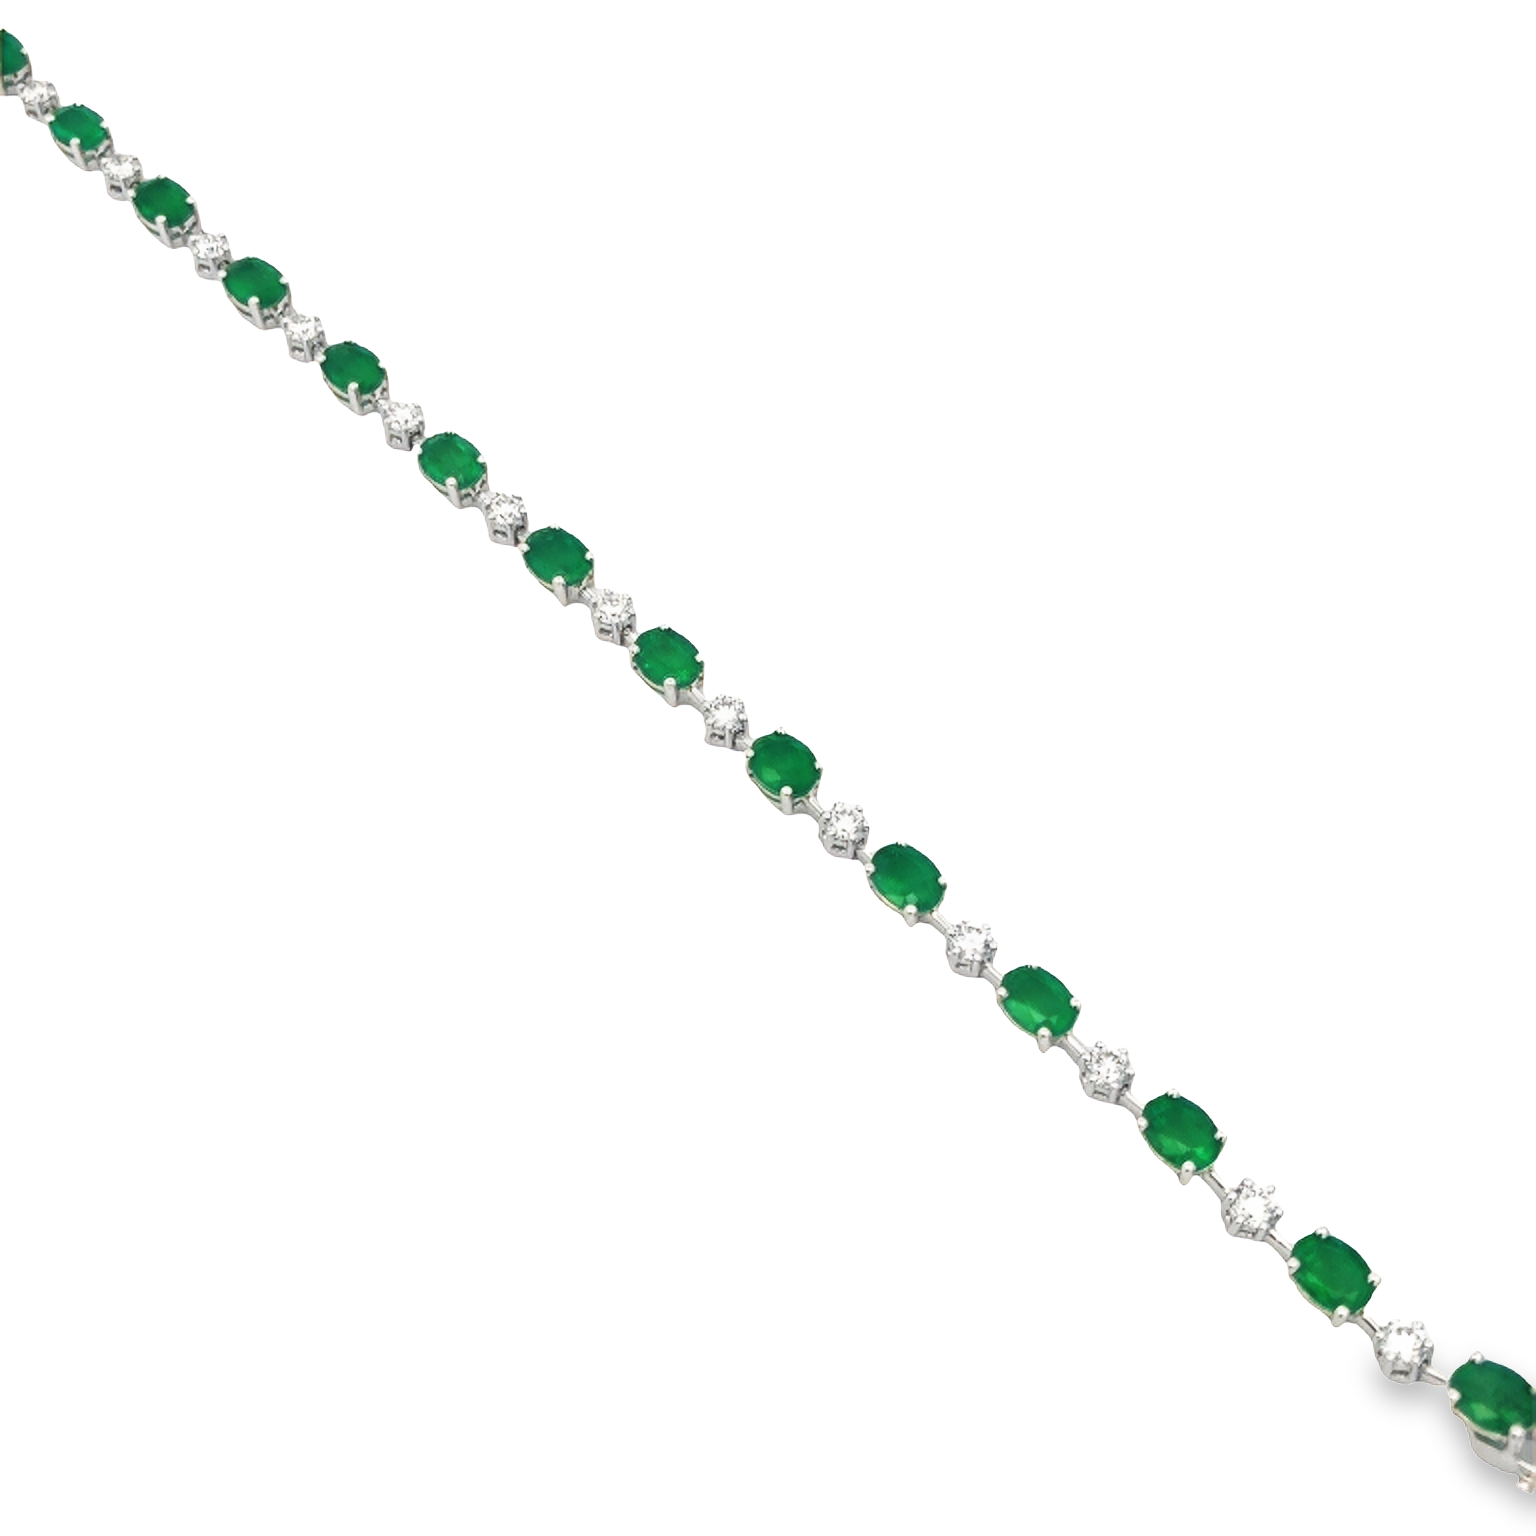 18K White Gold Emerald and Diamond Bracelet with 15 Oval Emeralds